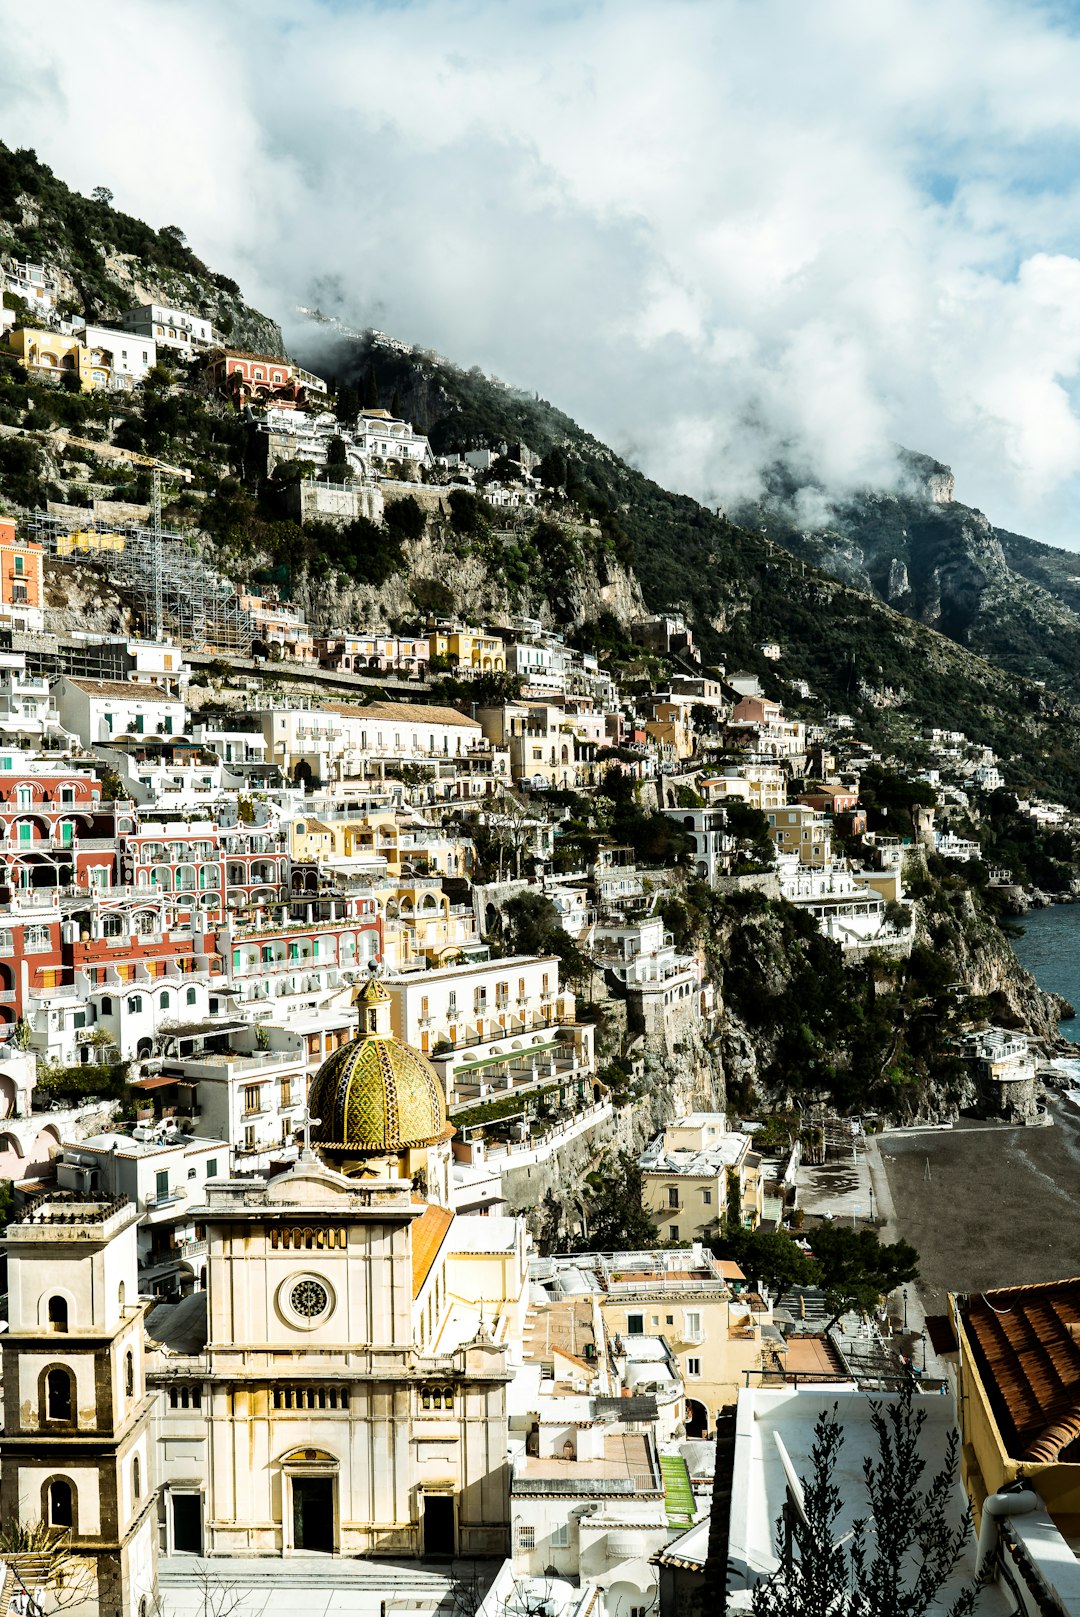 travelers stories about Town in Positano, Italy